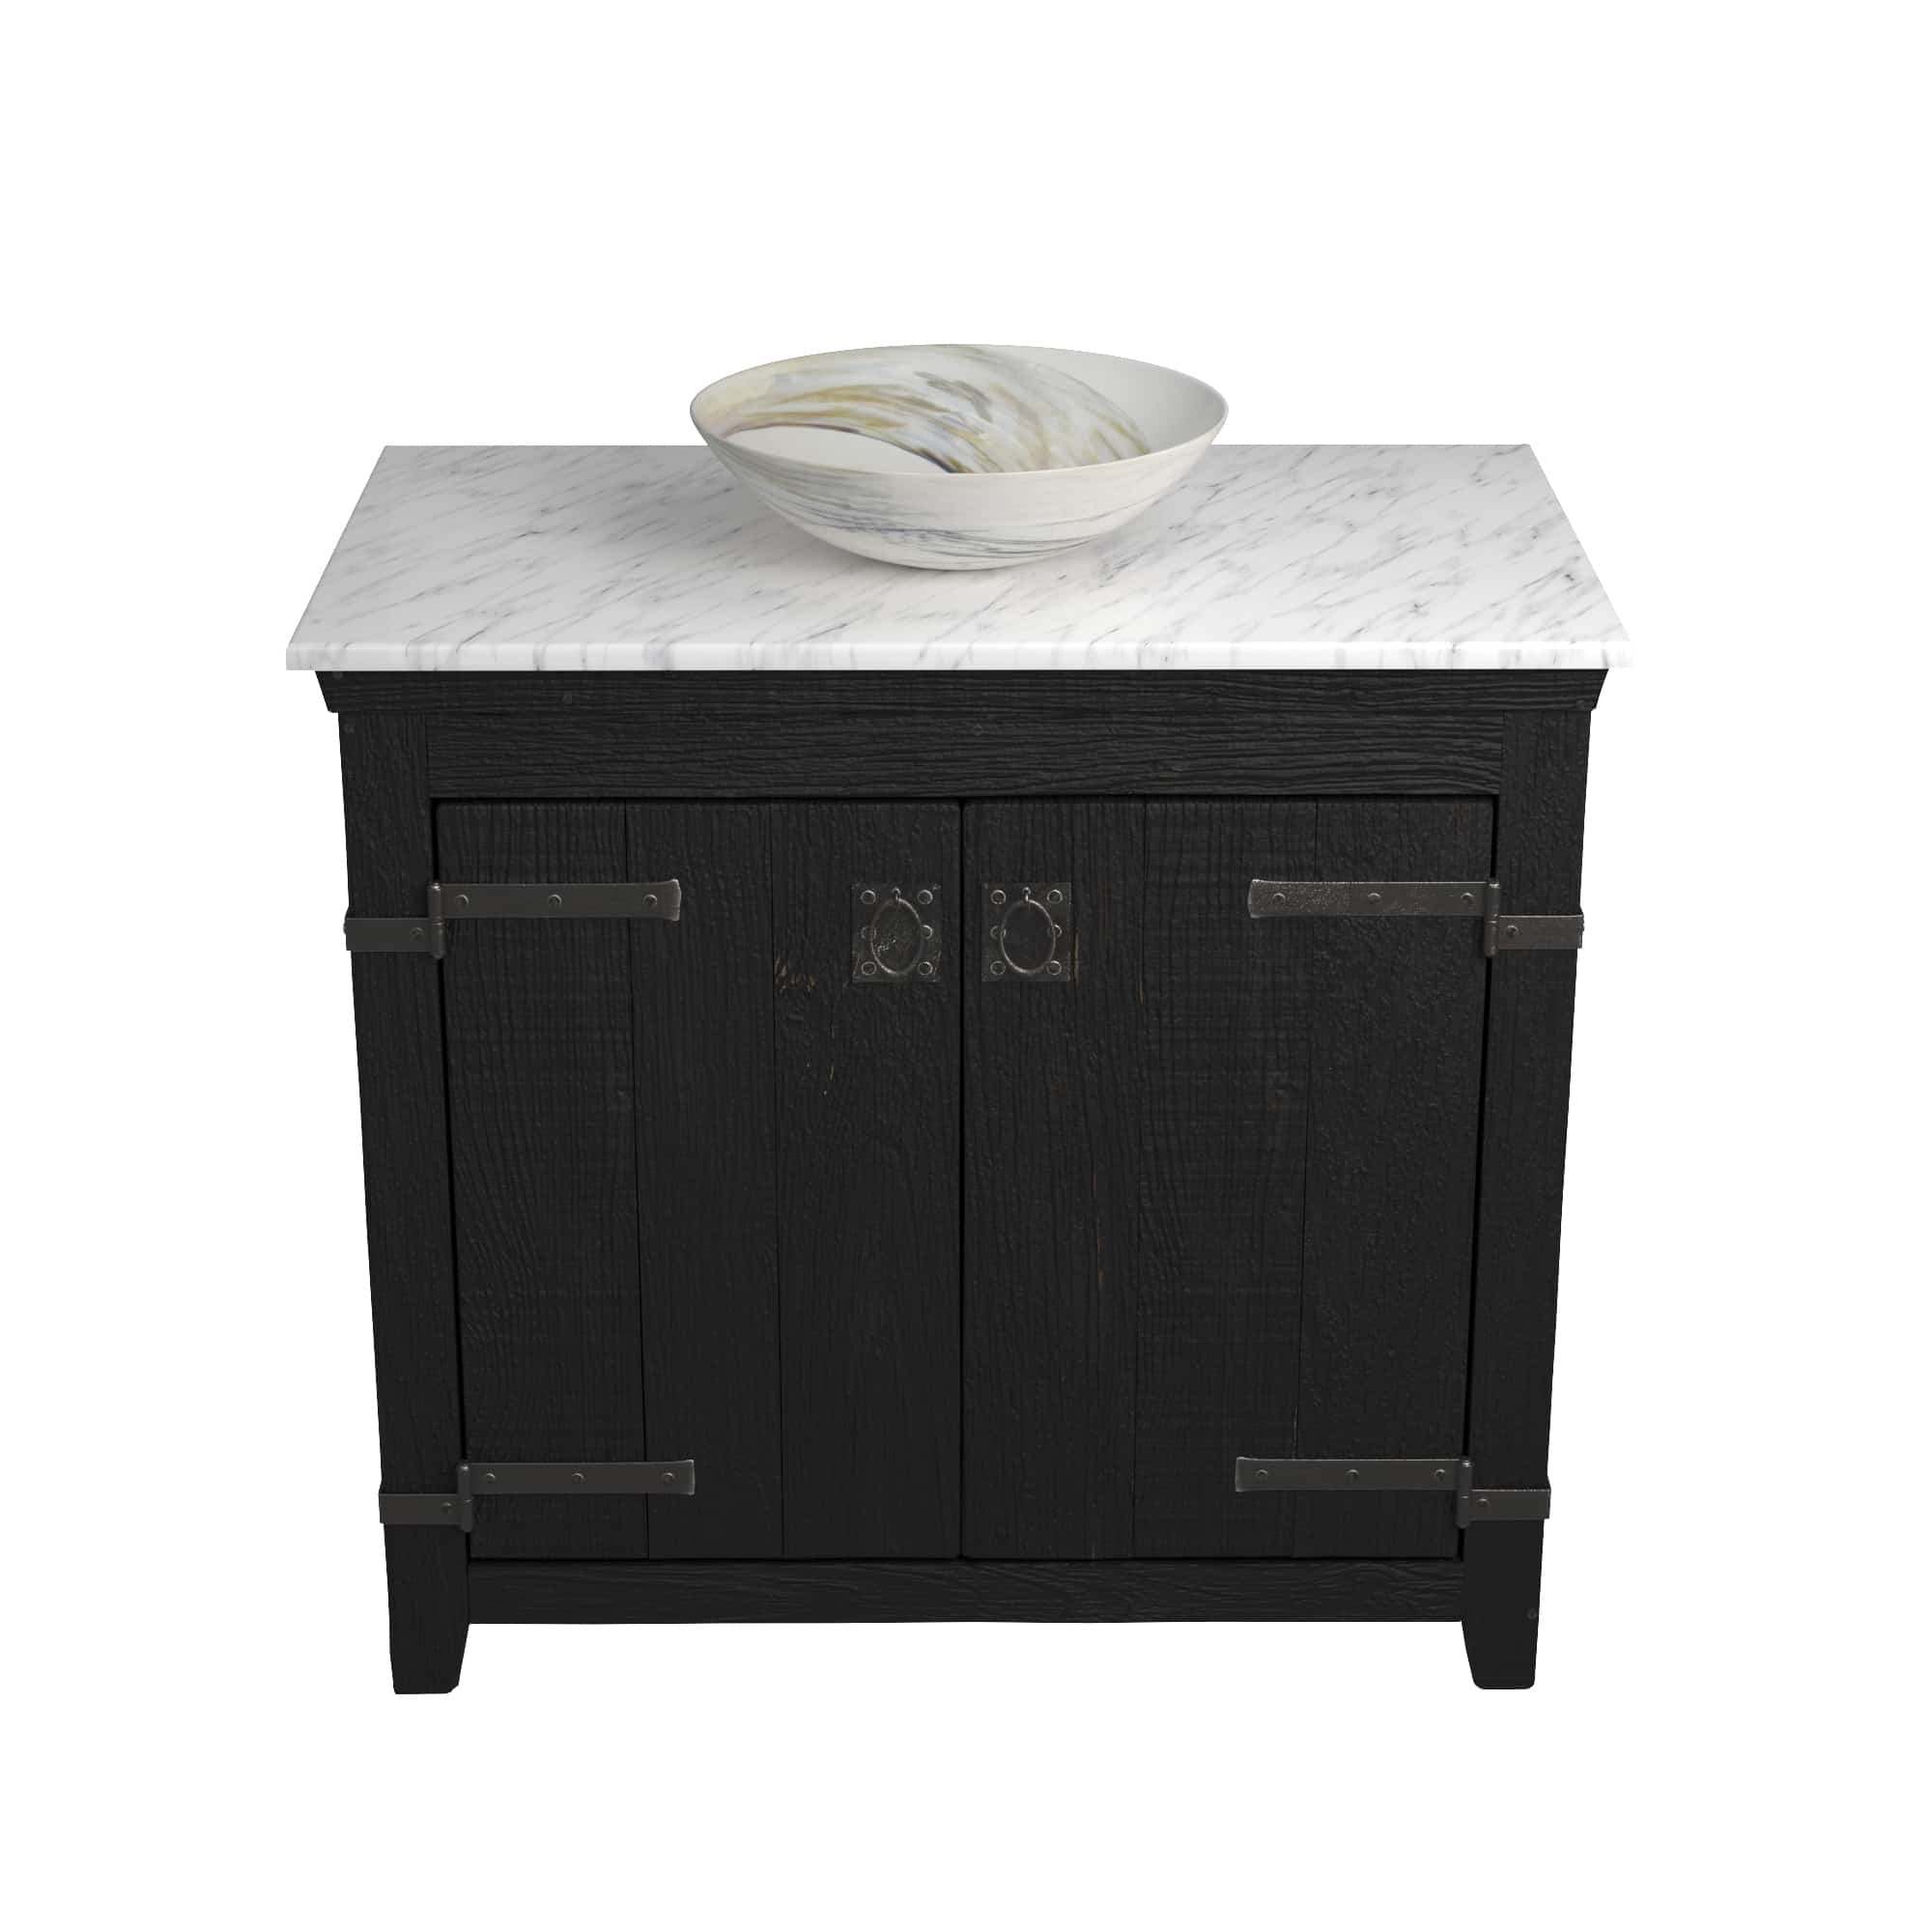 Native Trails 36" Americana Vanity in Anvil with Carrara Marble Top and Verona in Abalone, No Faucet Hole, BND36-VB-CT-MG-062